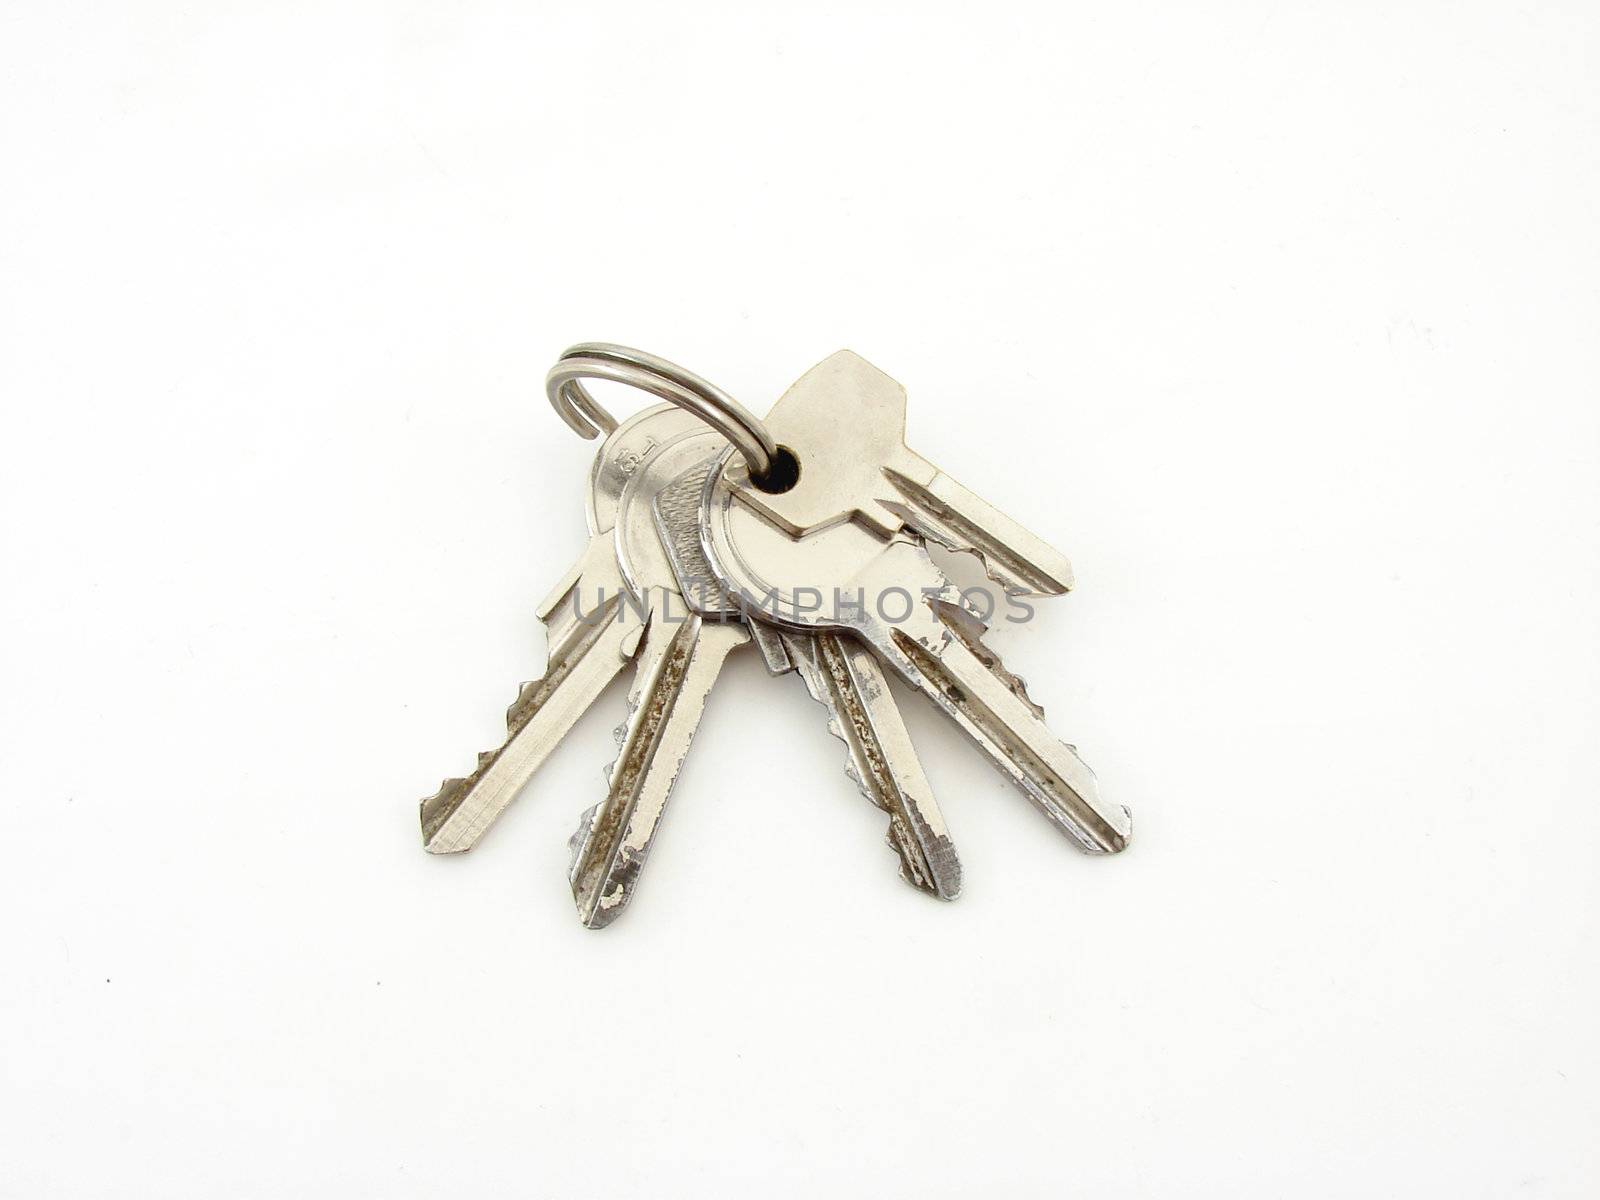 Silver keys isolated over white background.